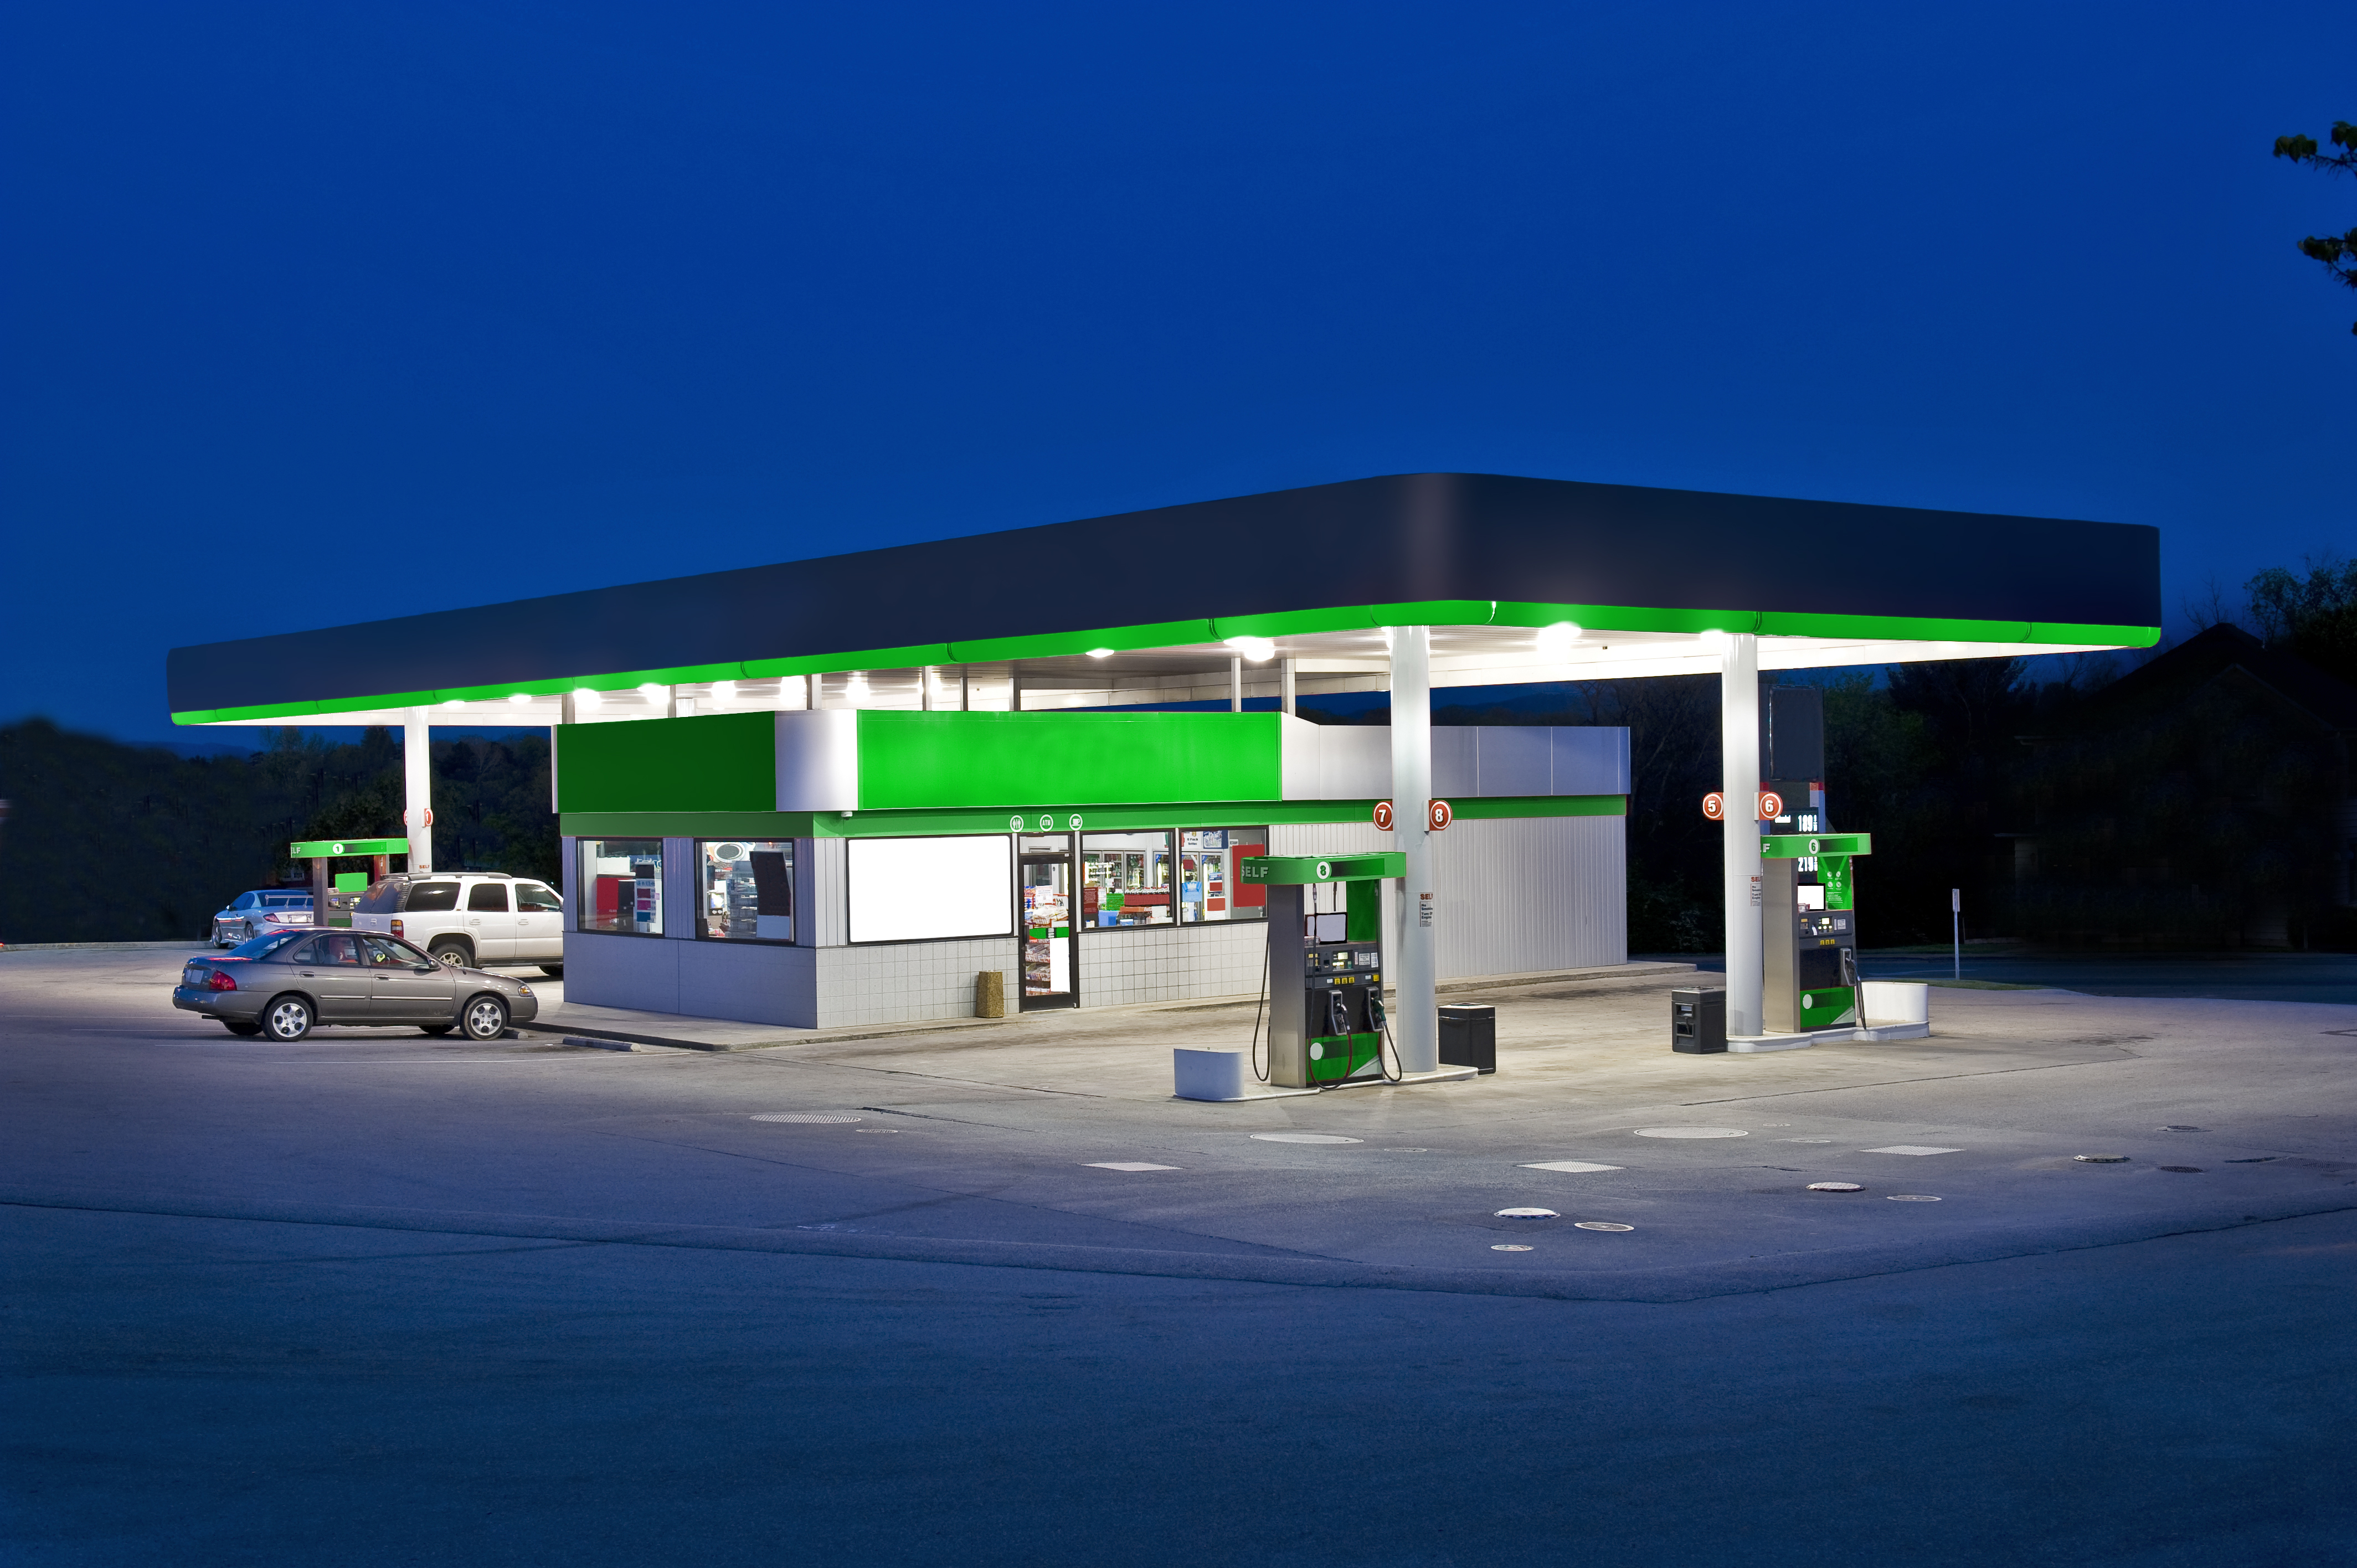 Fuel Station Operator Training: Your Business Depends On It